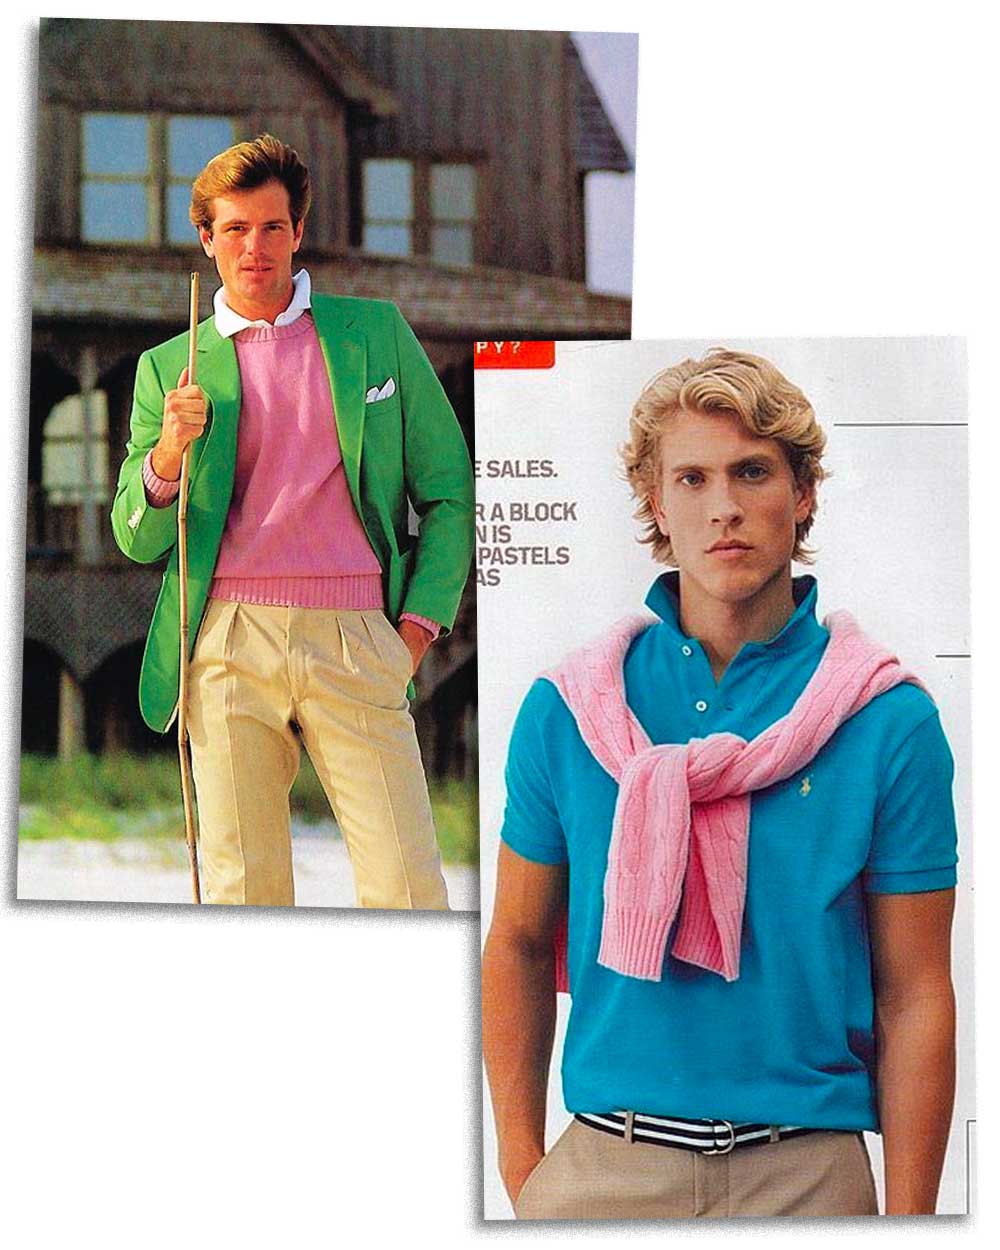 The Preppy Fashions of the 80s for men